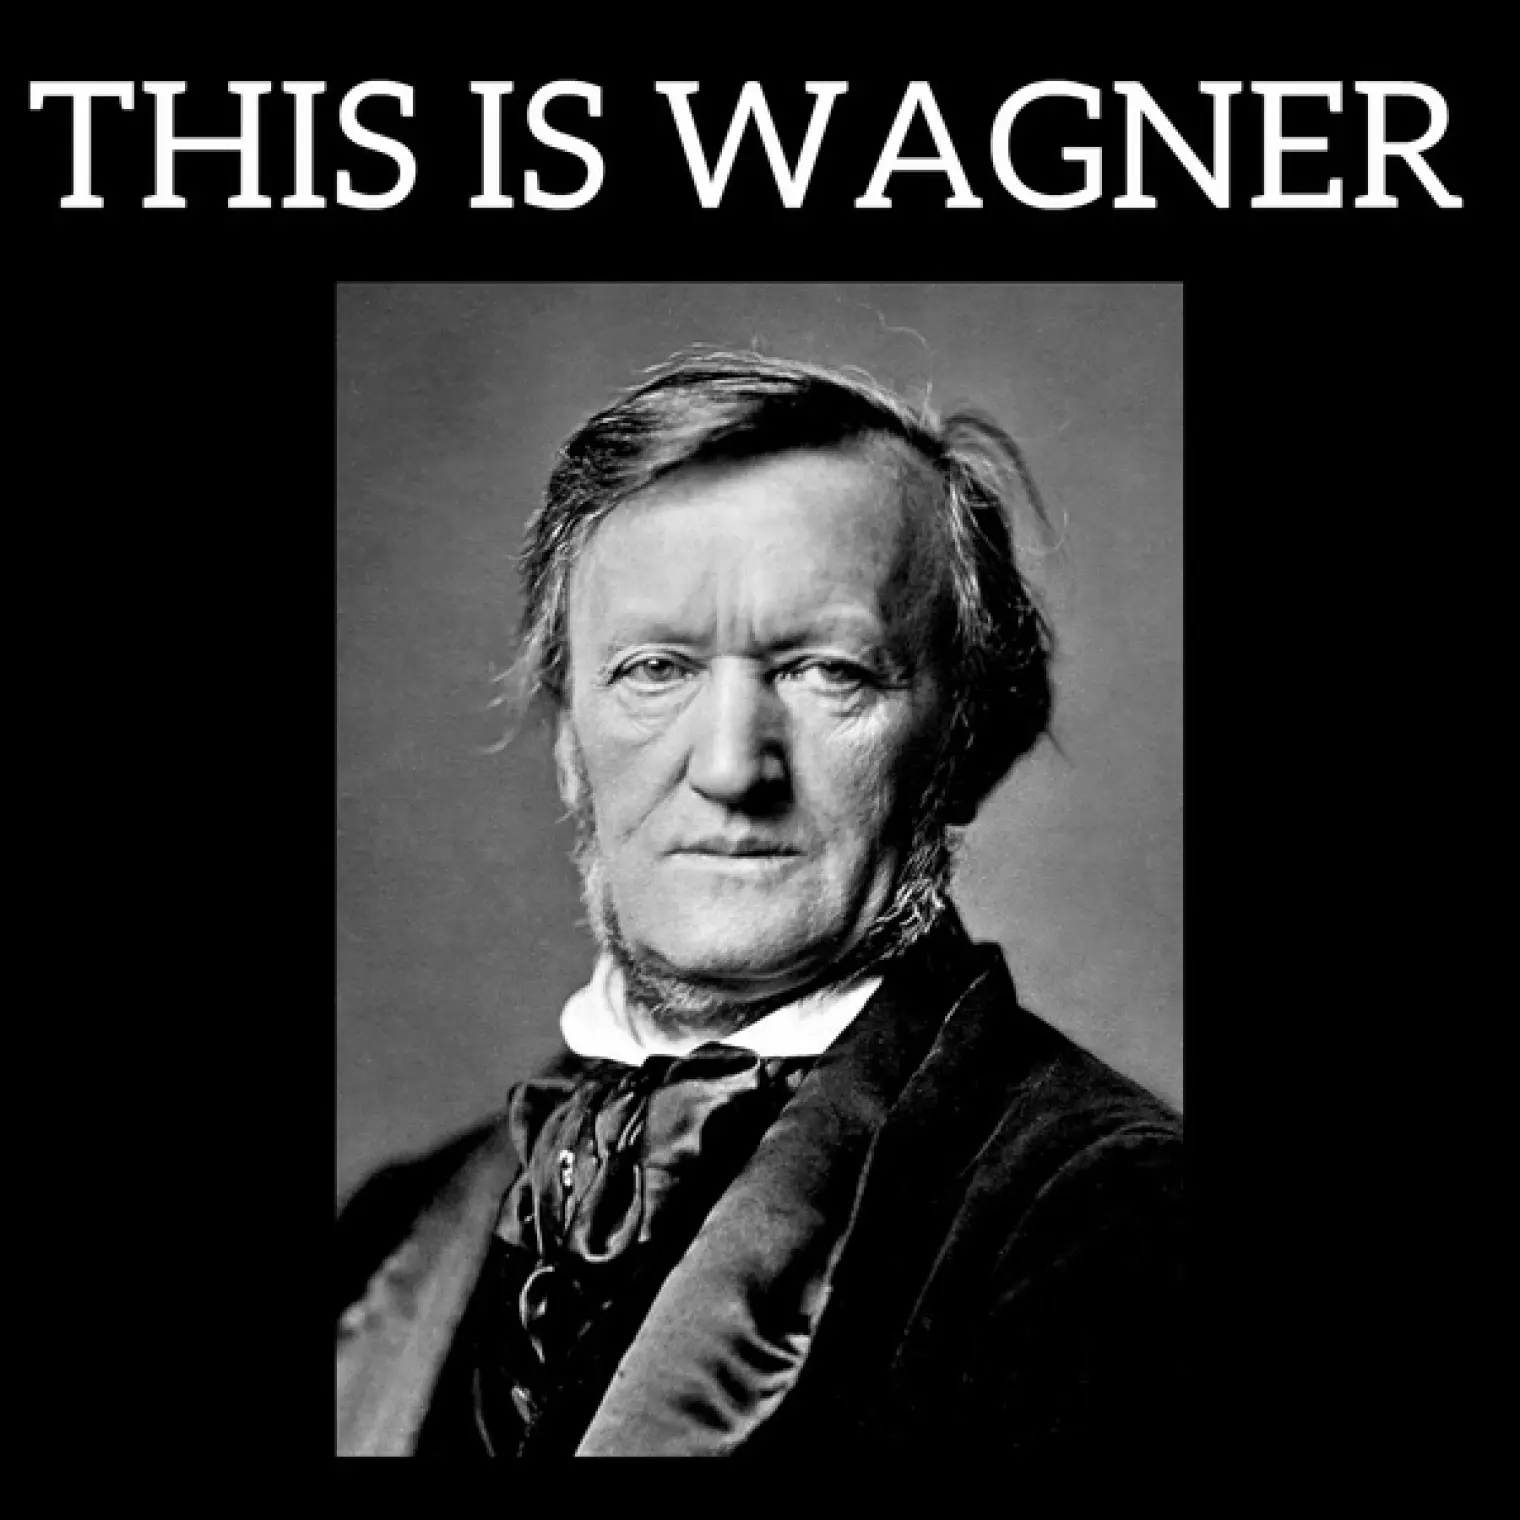 This is Wagner -  Richard Wagner 